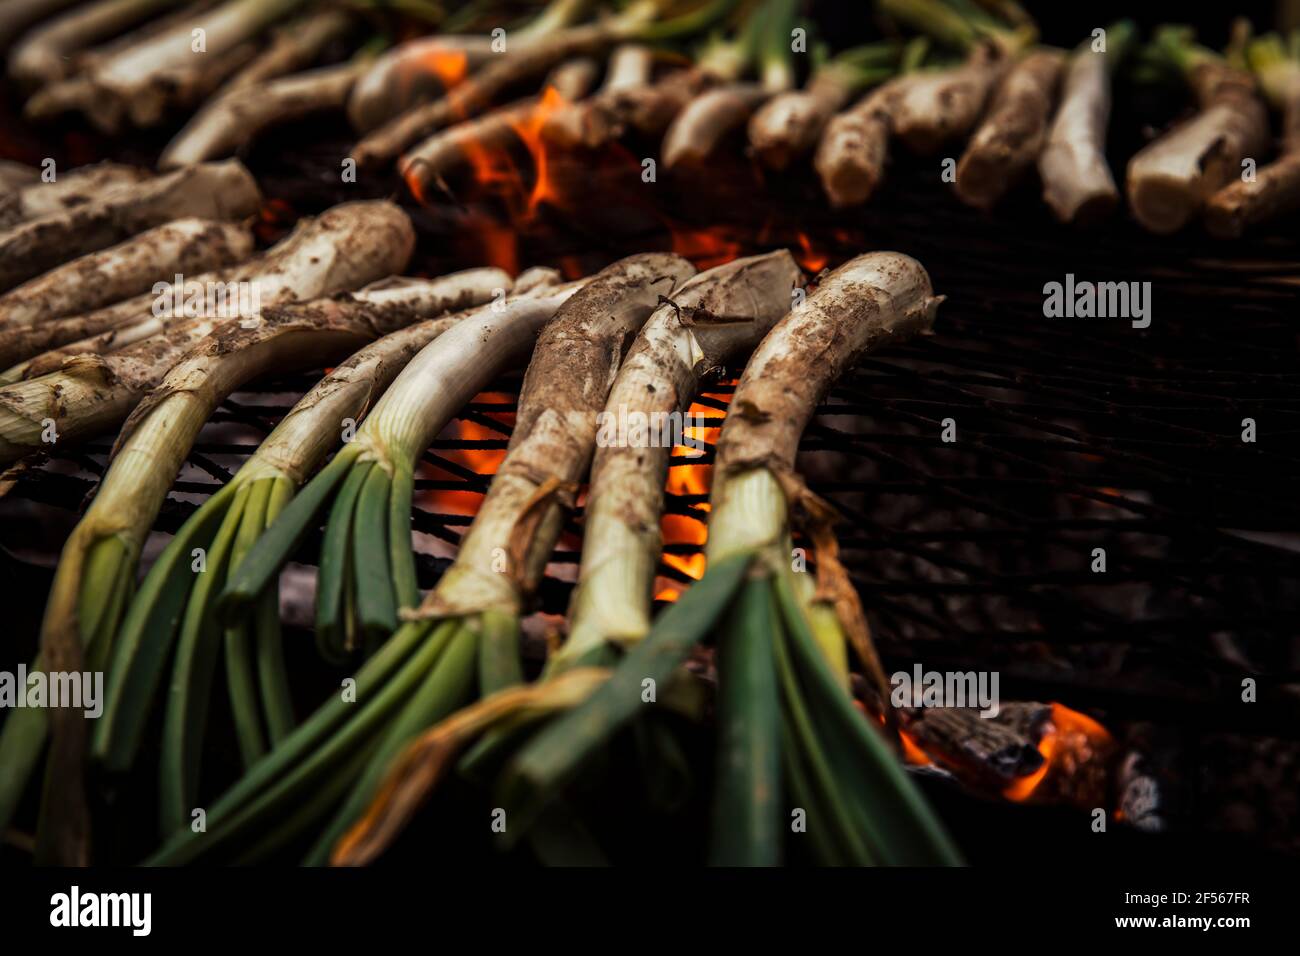 Close-up of scallions on barbecue grill outdoors Stock Photo